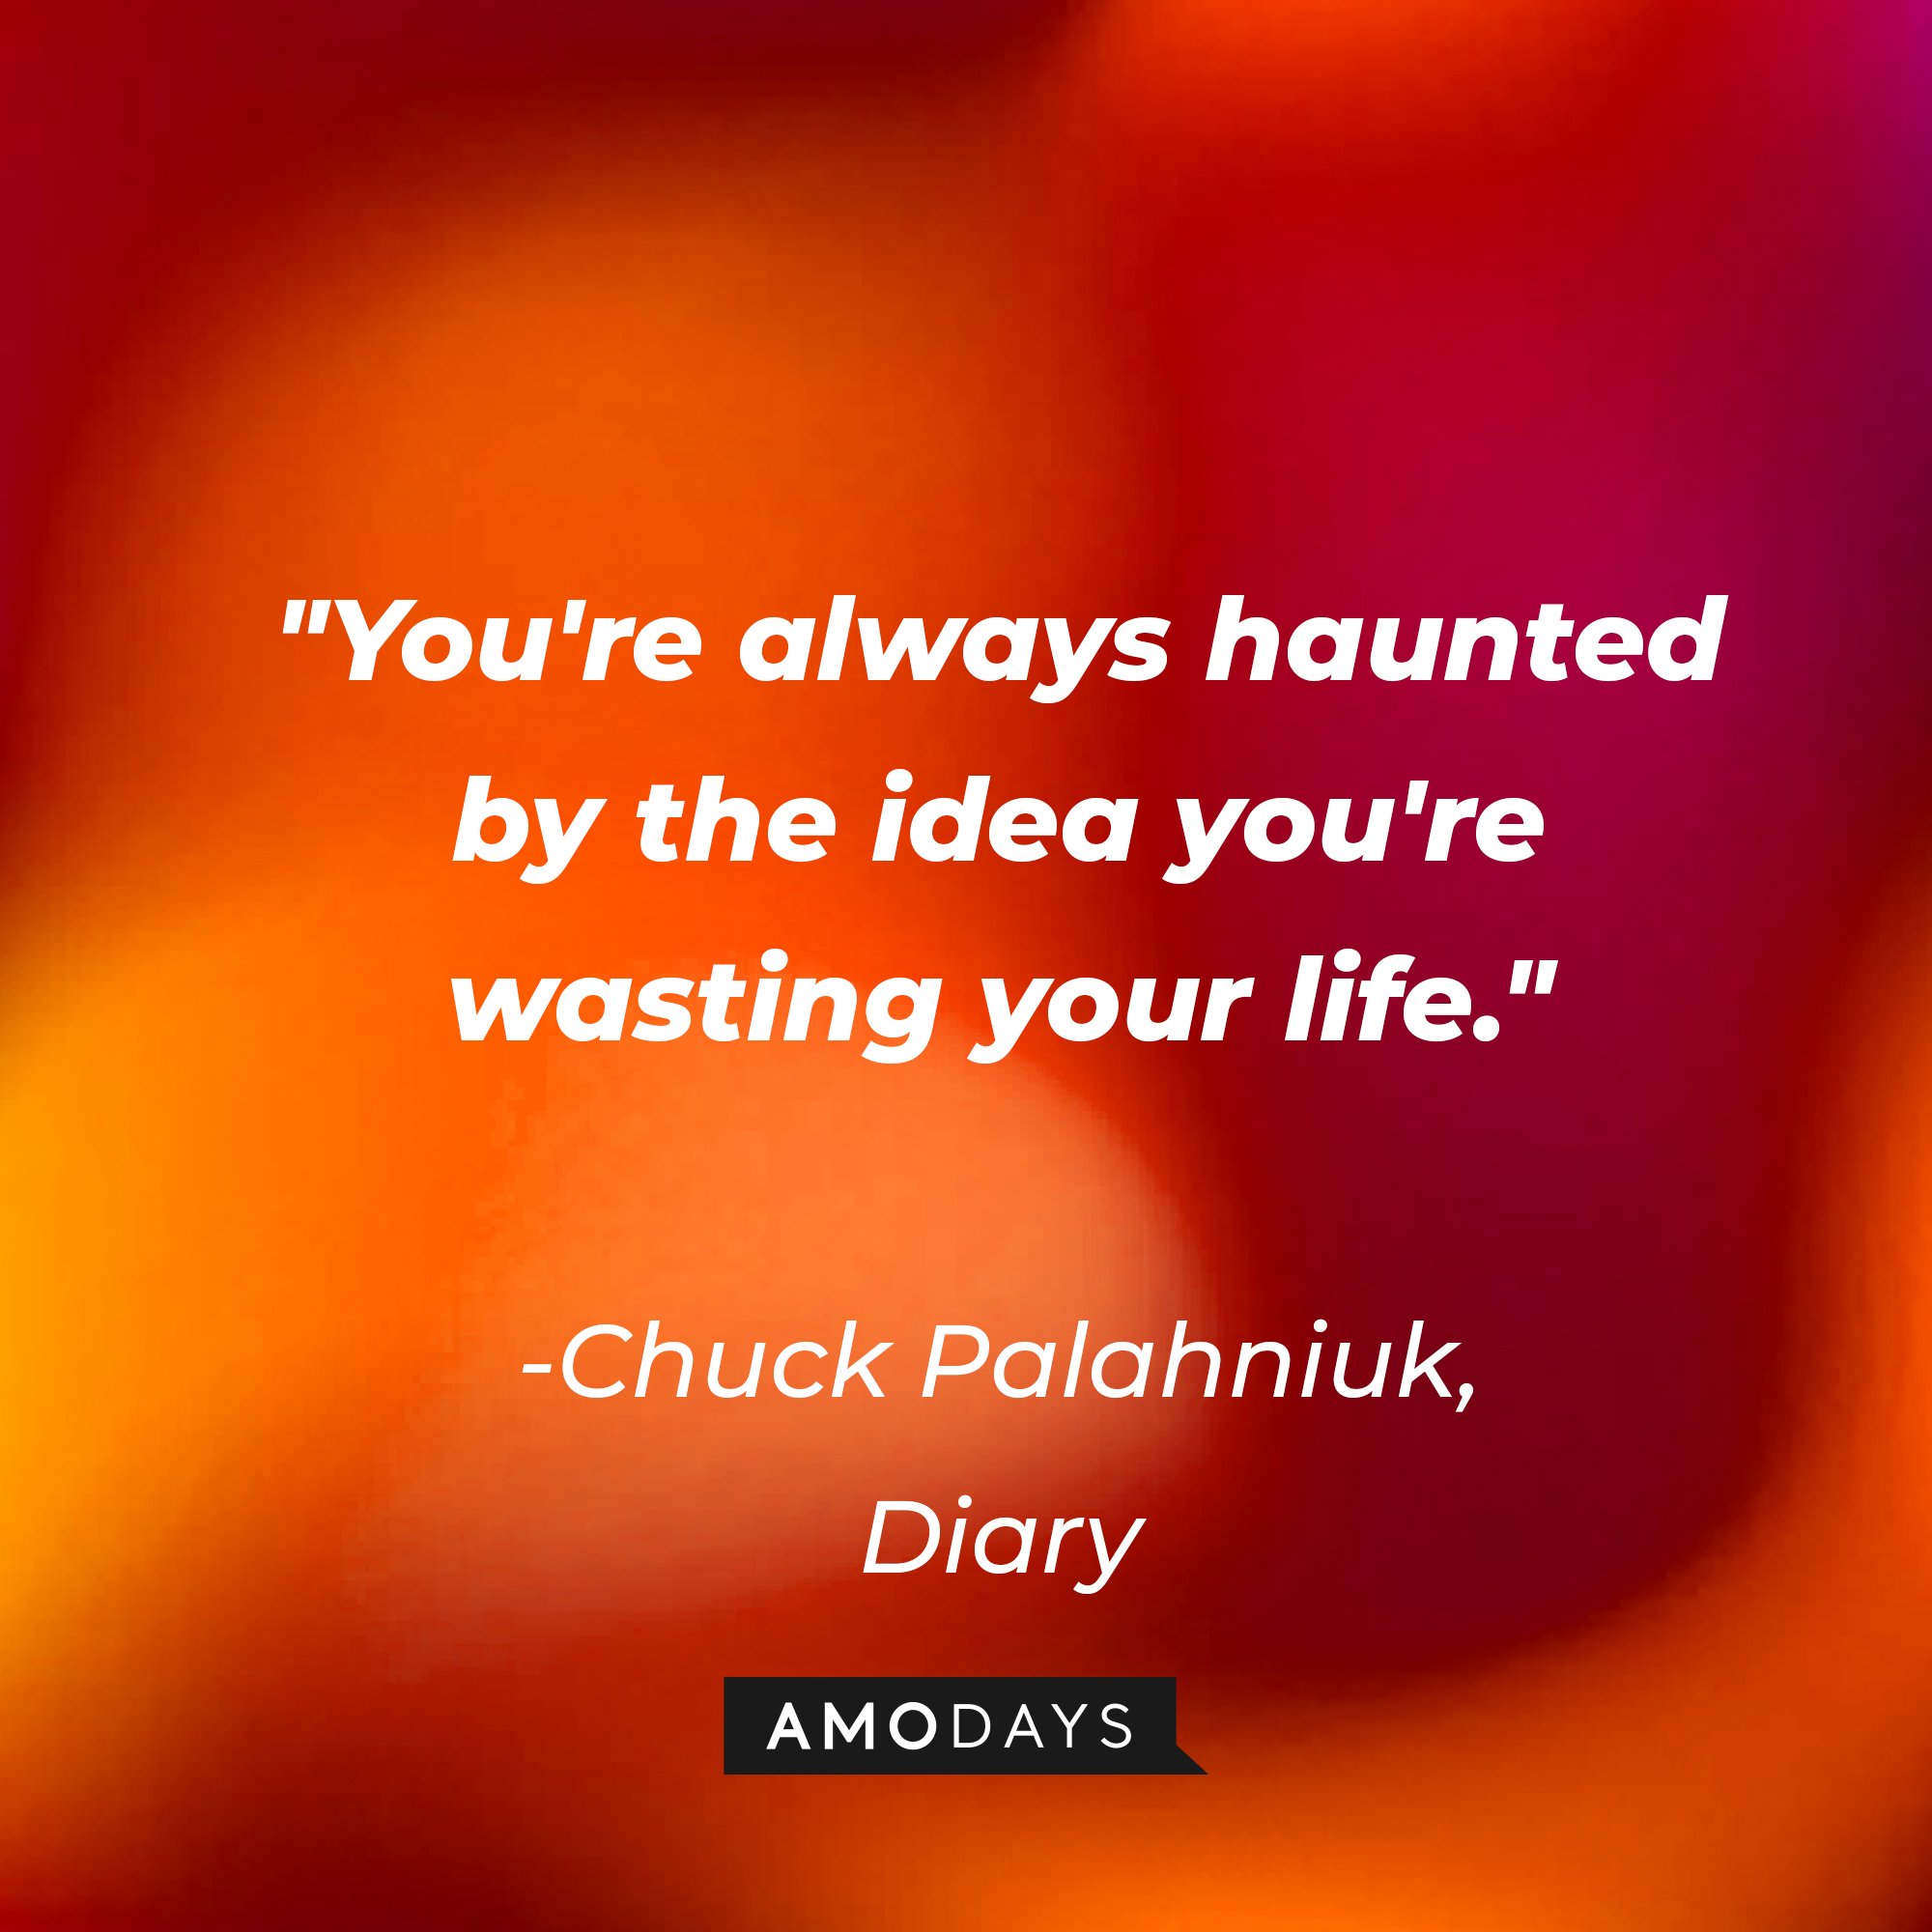 Chuck Palahniuk's quote: "You're always haunted by the idea you're wasting your life." | Image: Amodays